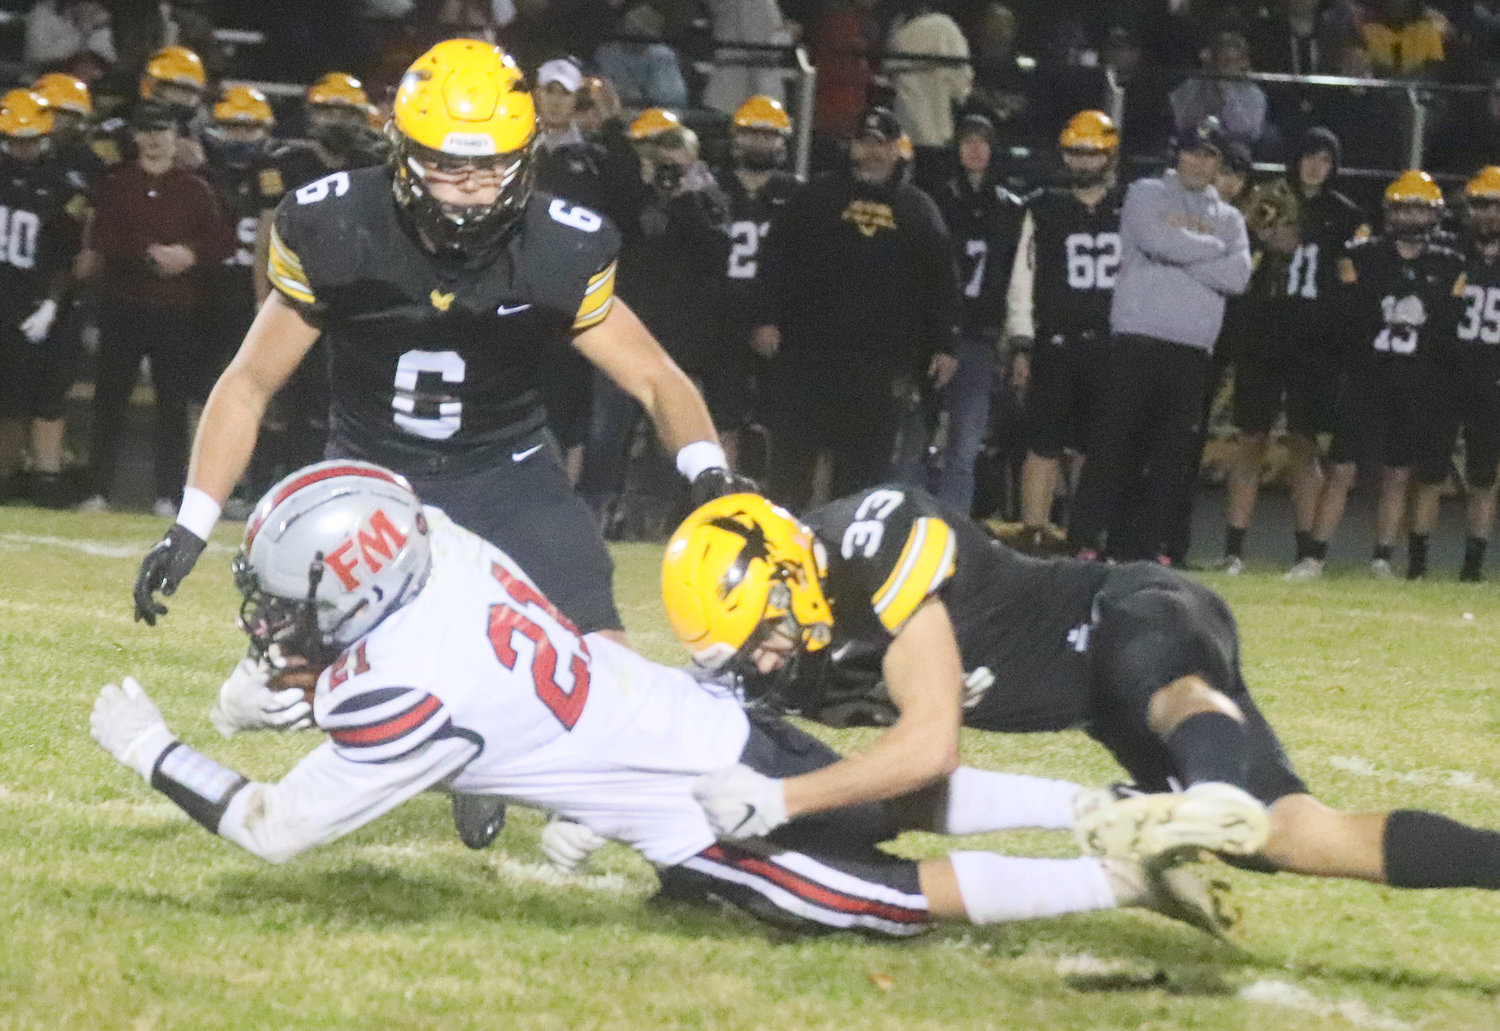 The Hounds' Kane Williams stretches for extra yards after a 16-yard reception in the third quarter Friday night in Waverly.